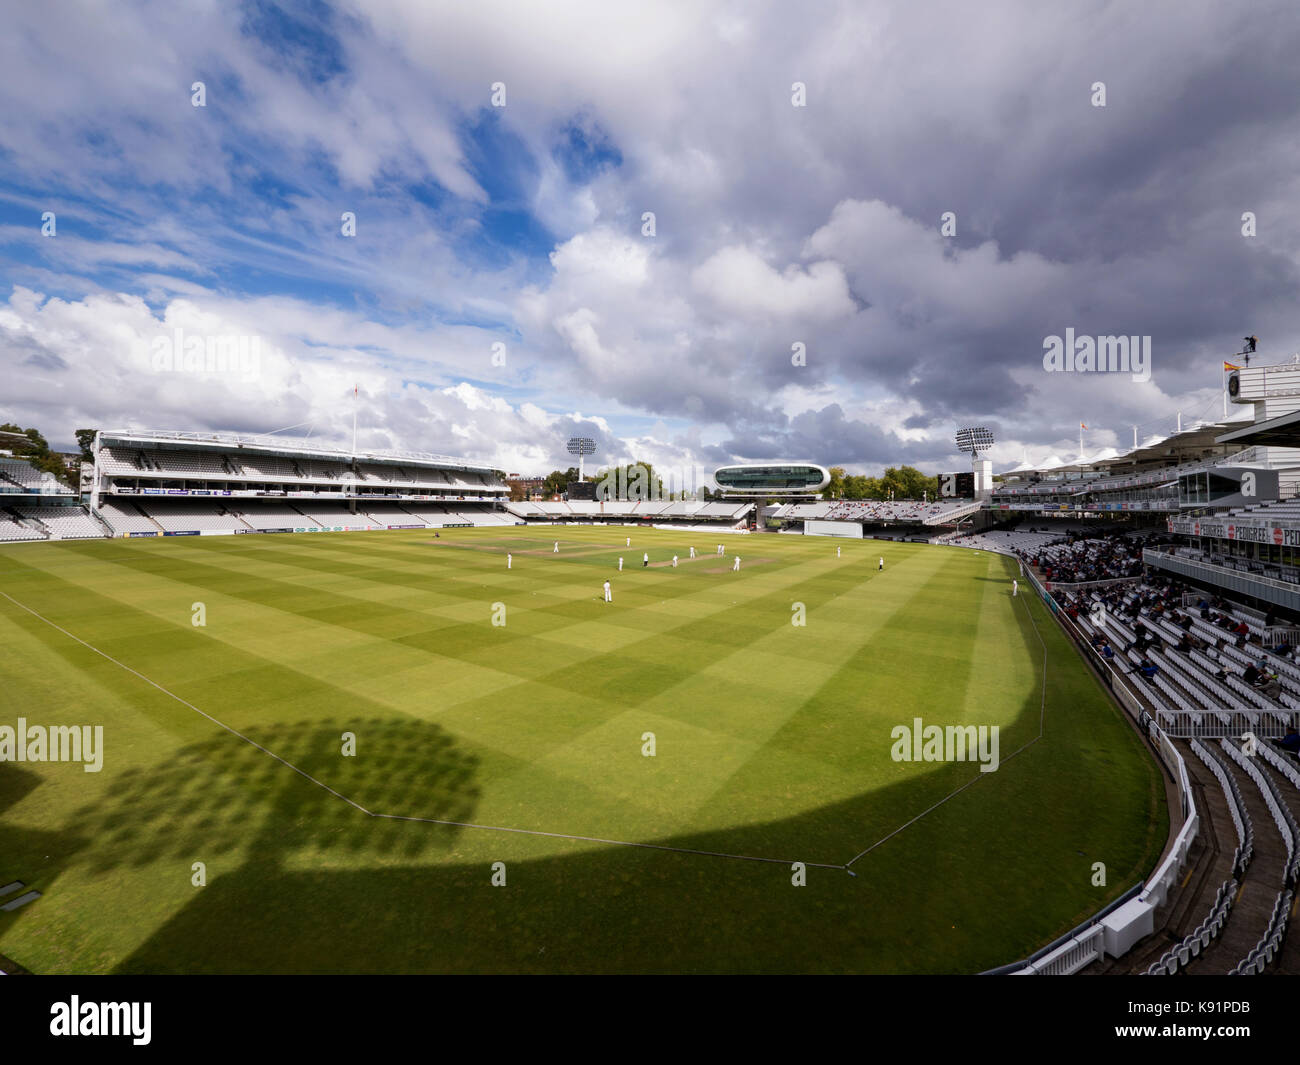 Le Lords Cricket Ground, St John's Wood, Londres, Angleterre, Royaume-Uni Banque D'Images